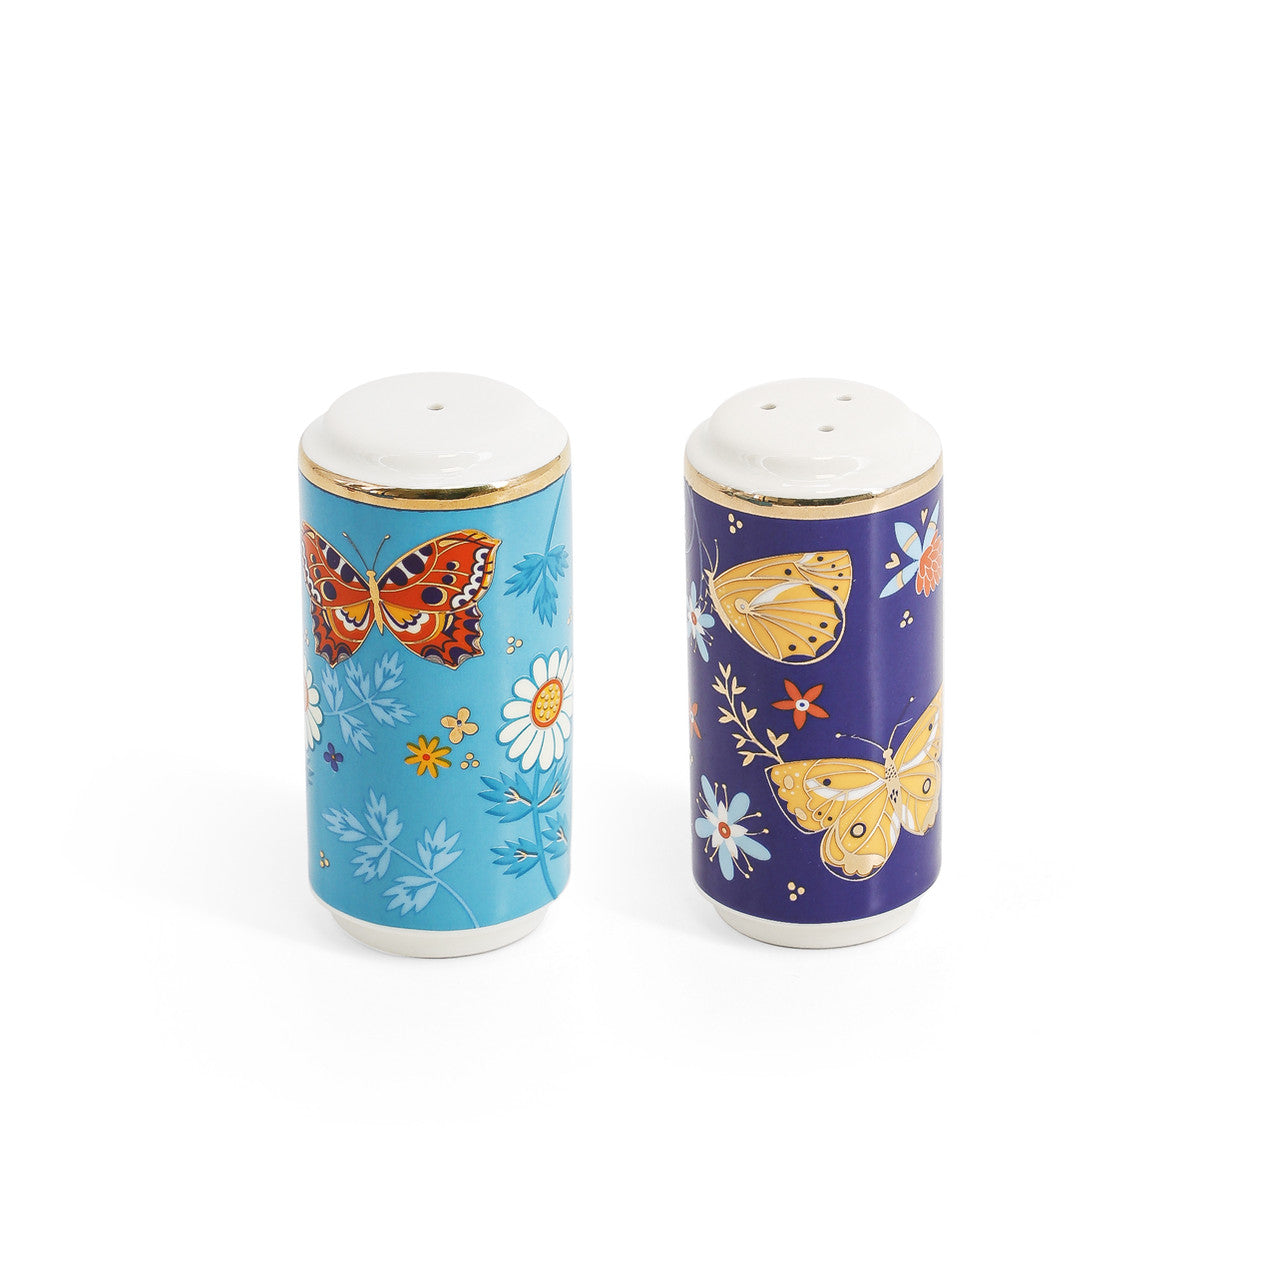 Tipperary Crystal Butterfly Salt & Pepper - New 2022  Drawing inspiration from urban garden, the Tipperary Crystal Butterfly collection transforms an icon into something modern and unexpected. Playful and elegant, this collection draws from the inherent beauty of the butterfly.